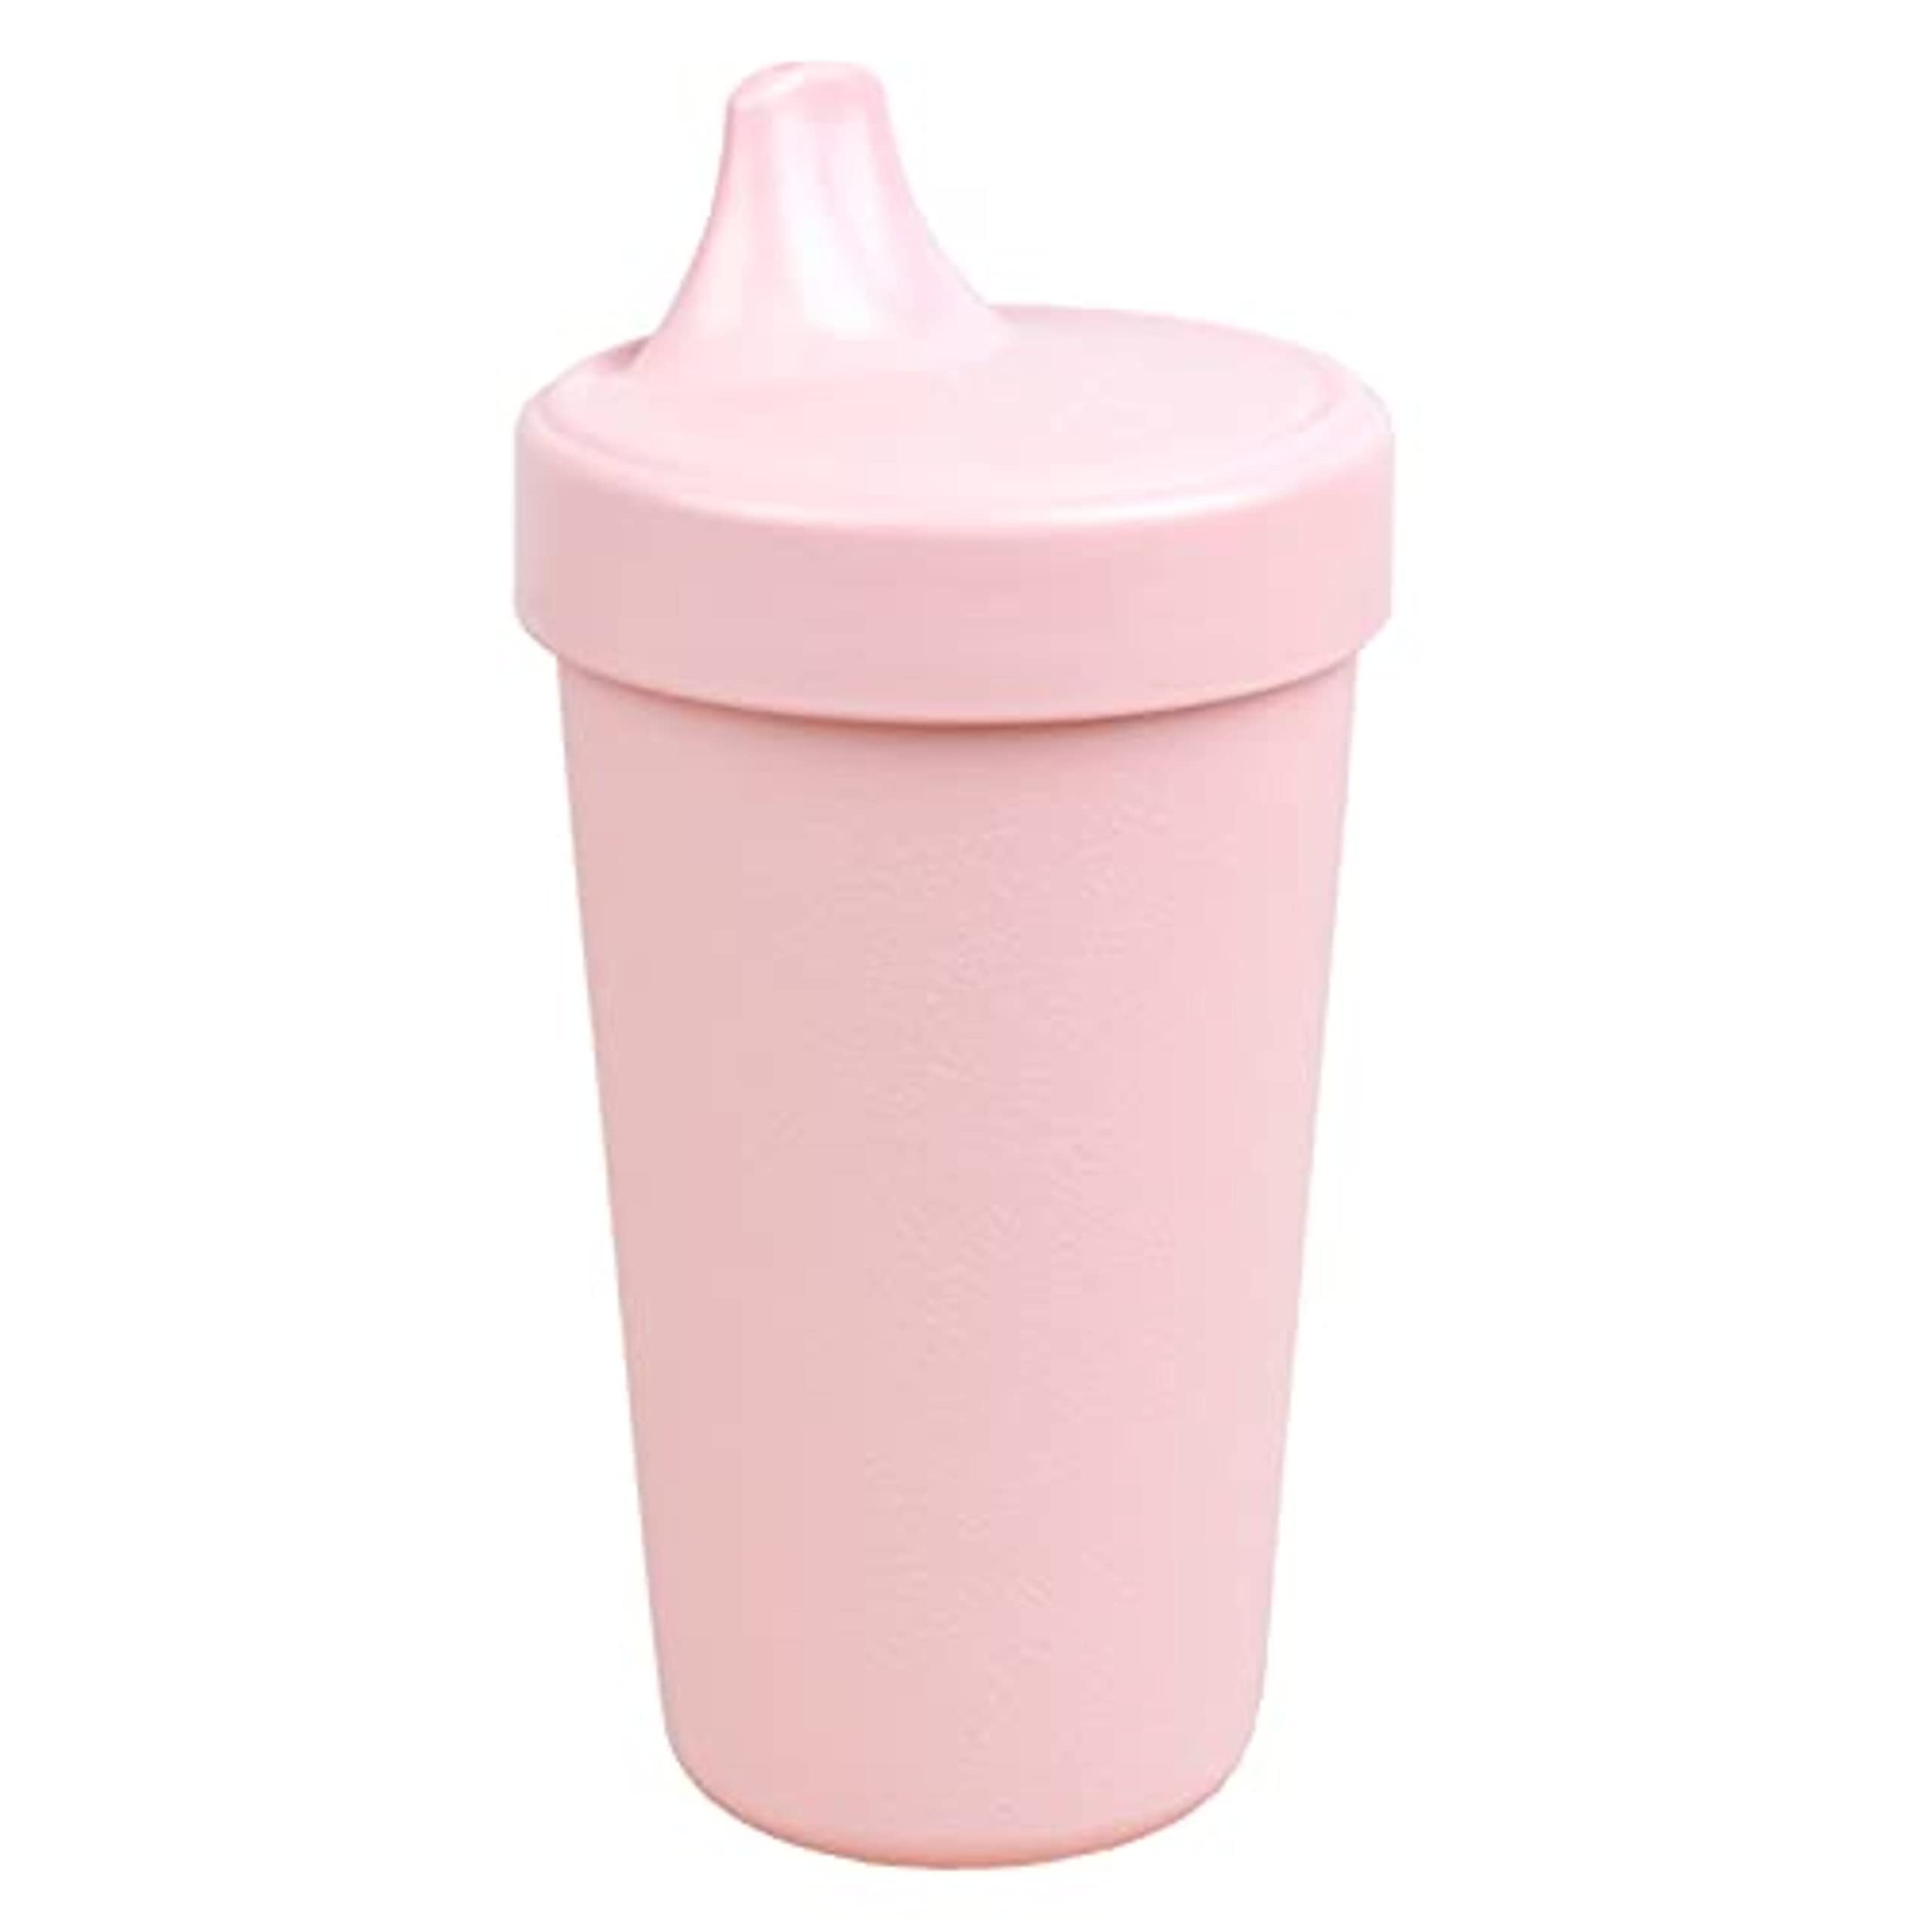 Re-Play Toddler Soft Spout Cup  Family Tableware Made in the USA from  Recycled Plastics